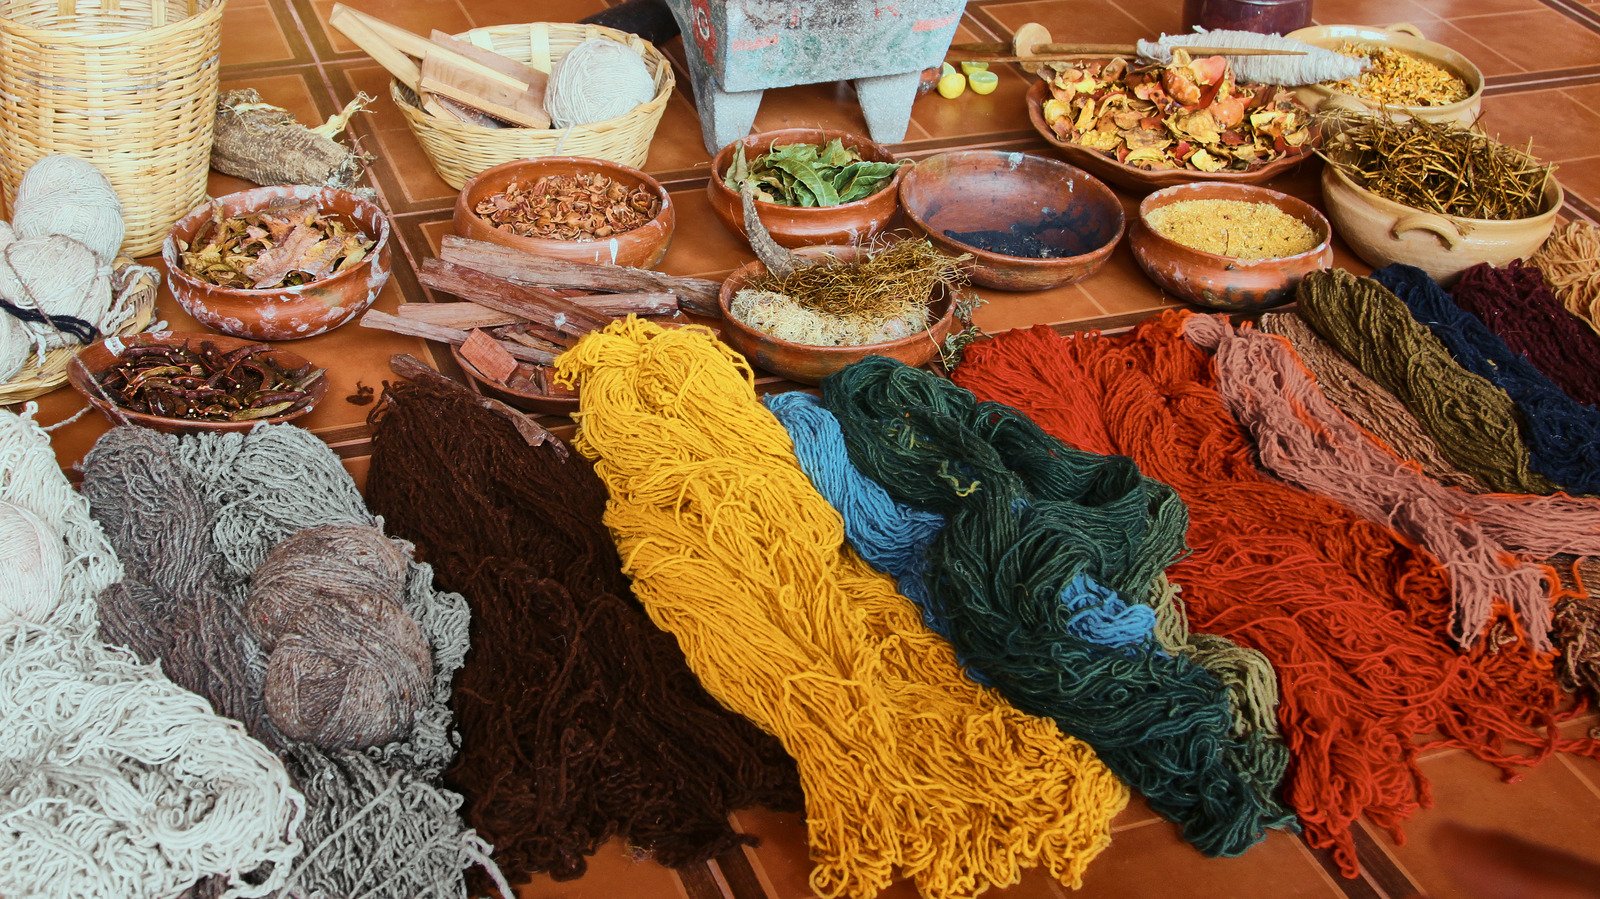 15 Plants You Can Put In Your Garden For Natural Dyes